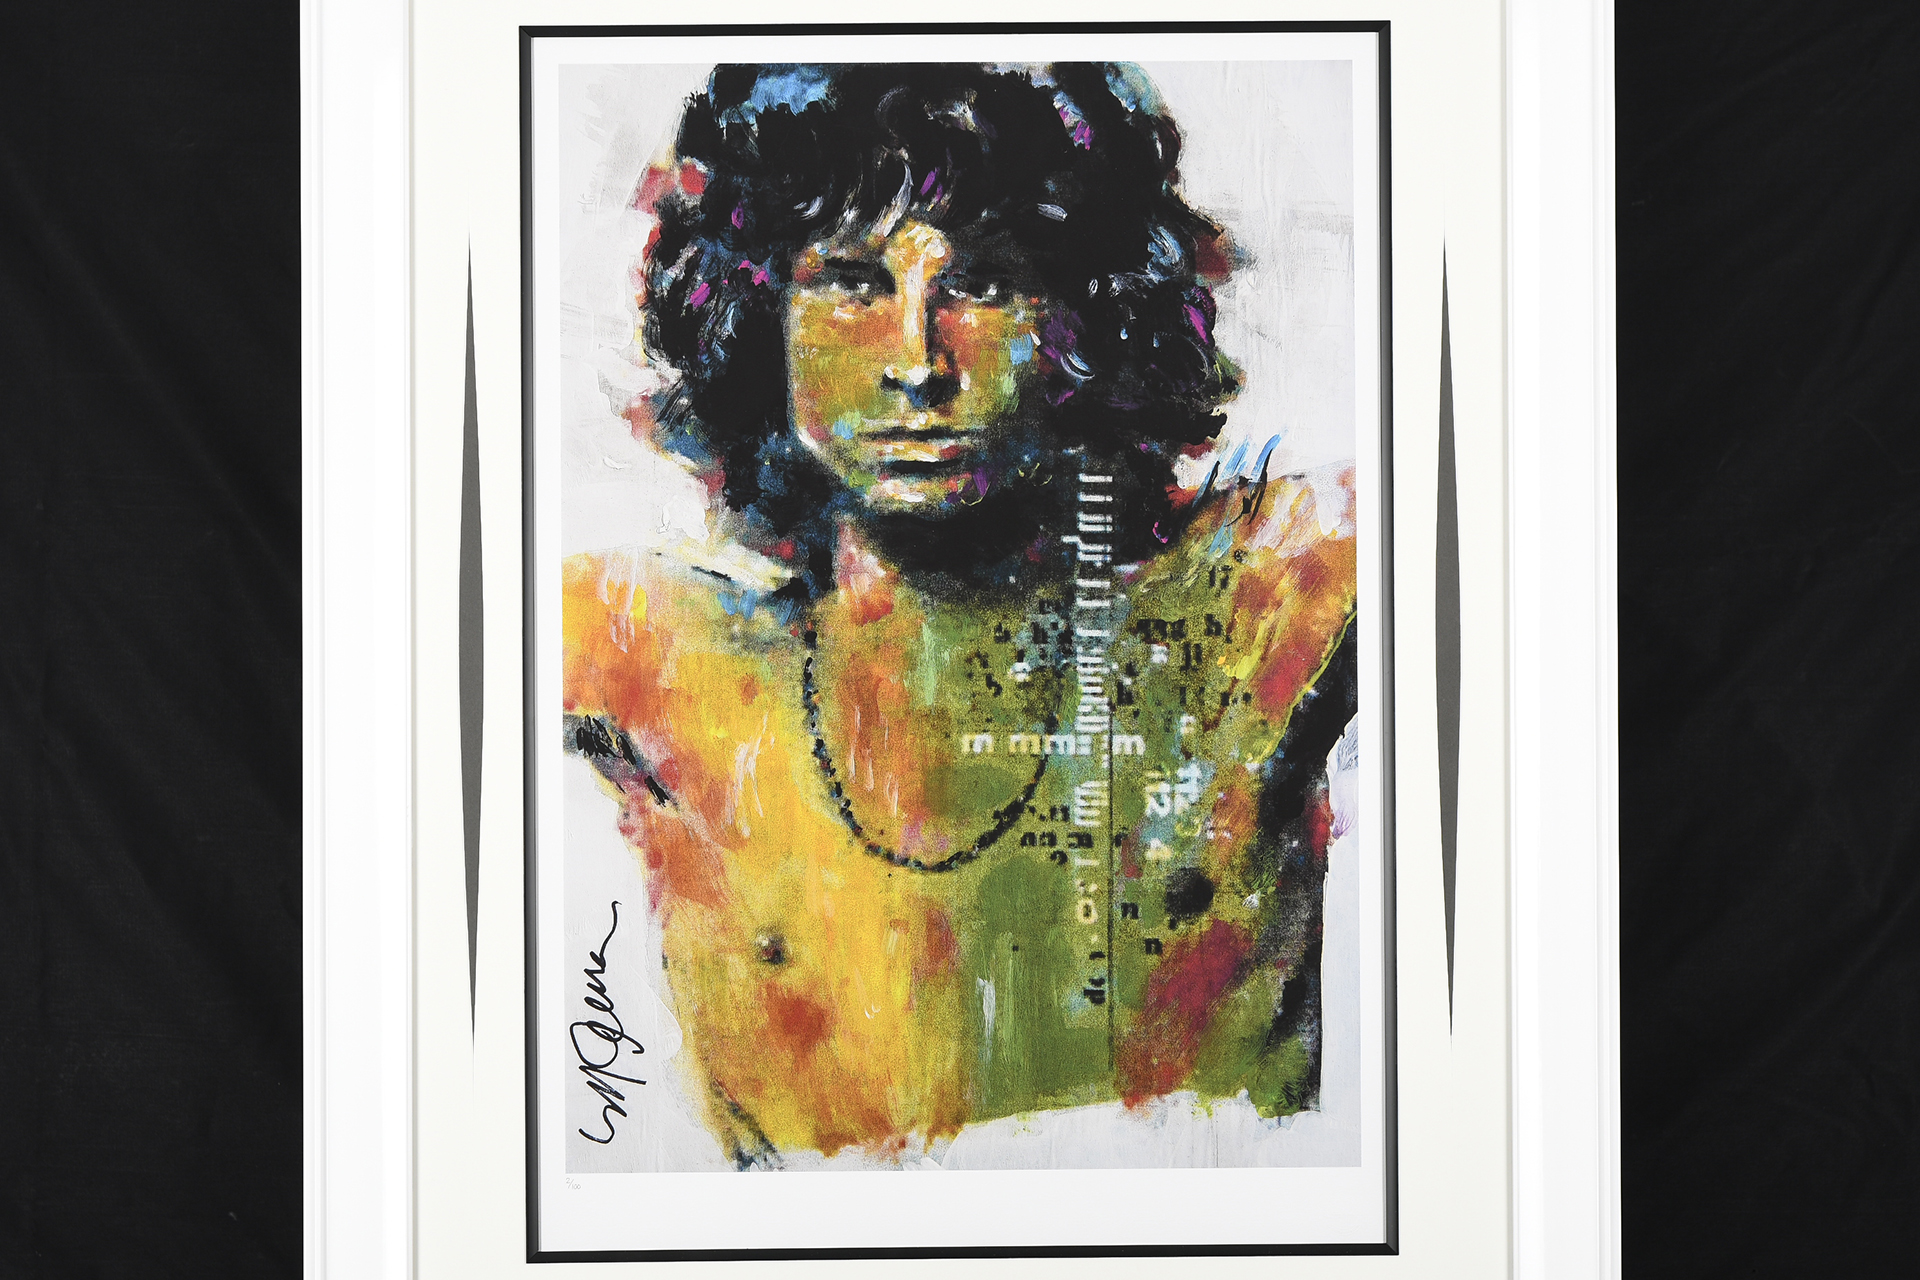 Large Authenticated Limited Edition by the Late Famous American Artist Sidney Maurer. (Jim Morrison)